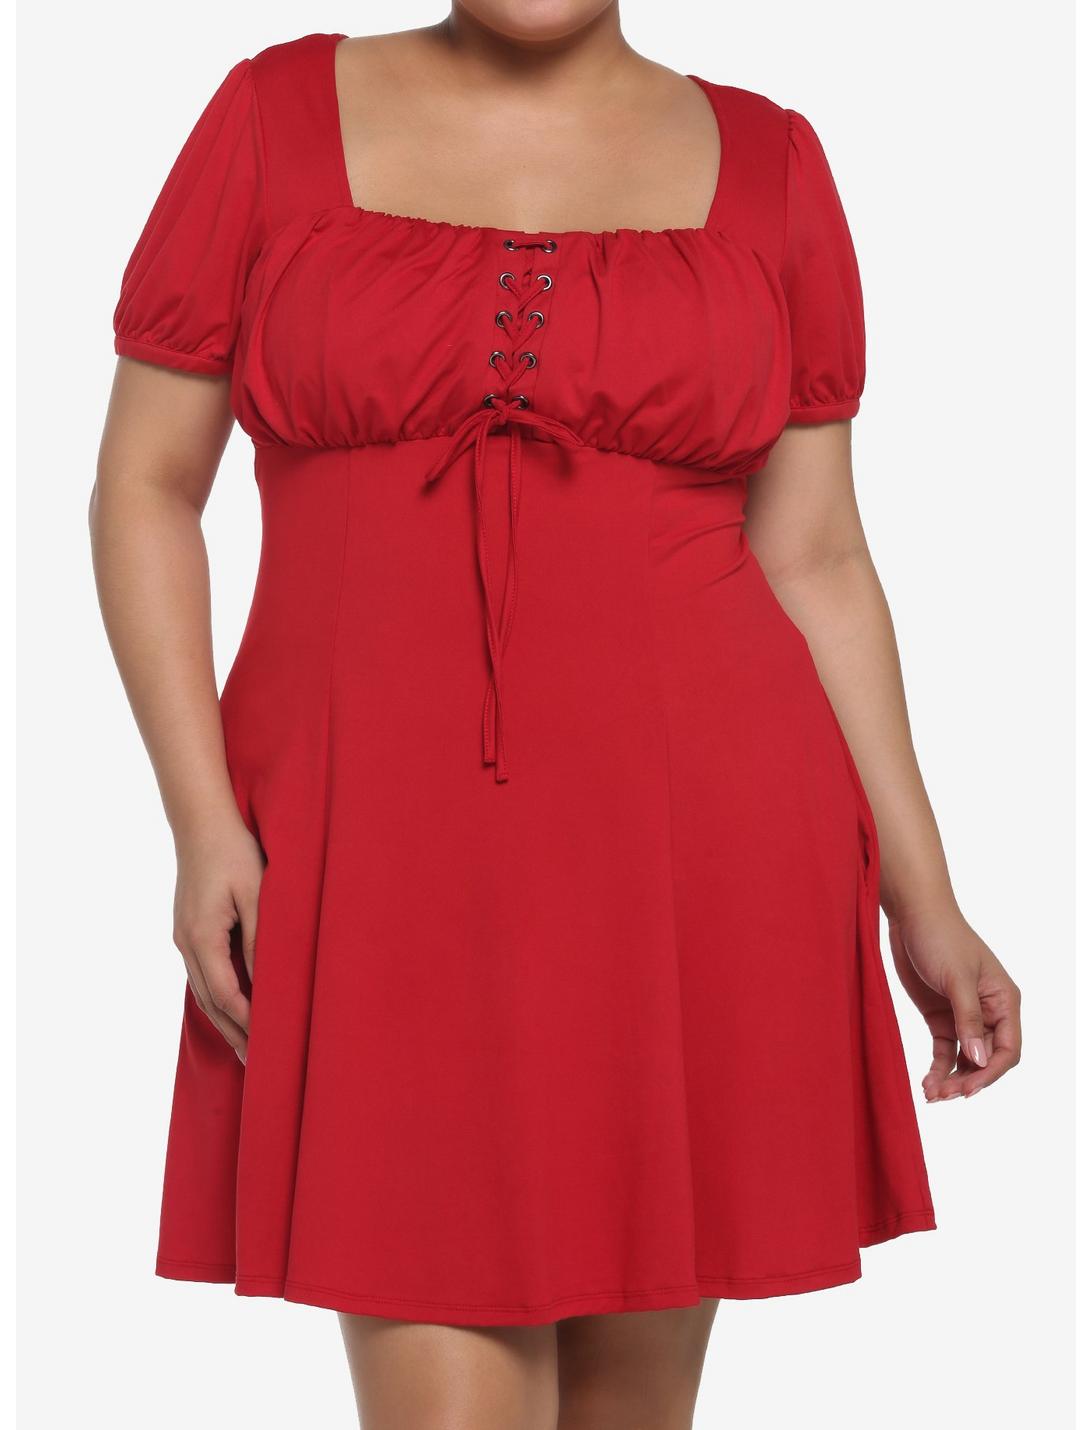 Red Empire Waist Dress Plus Size, RED, hi-res